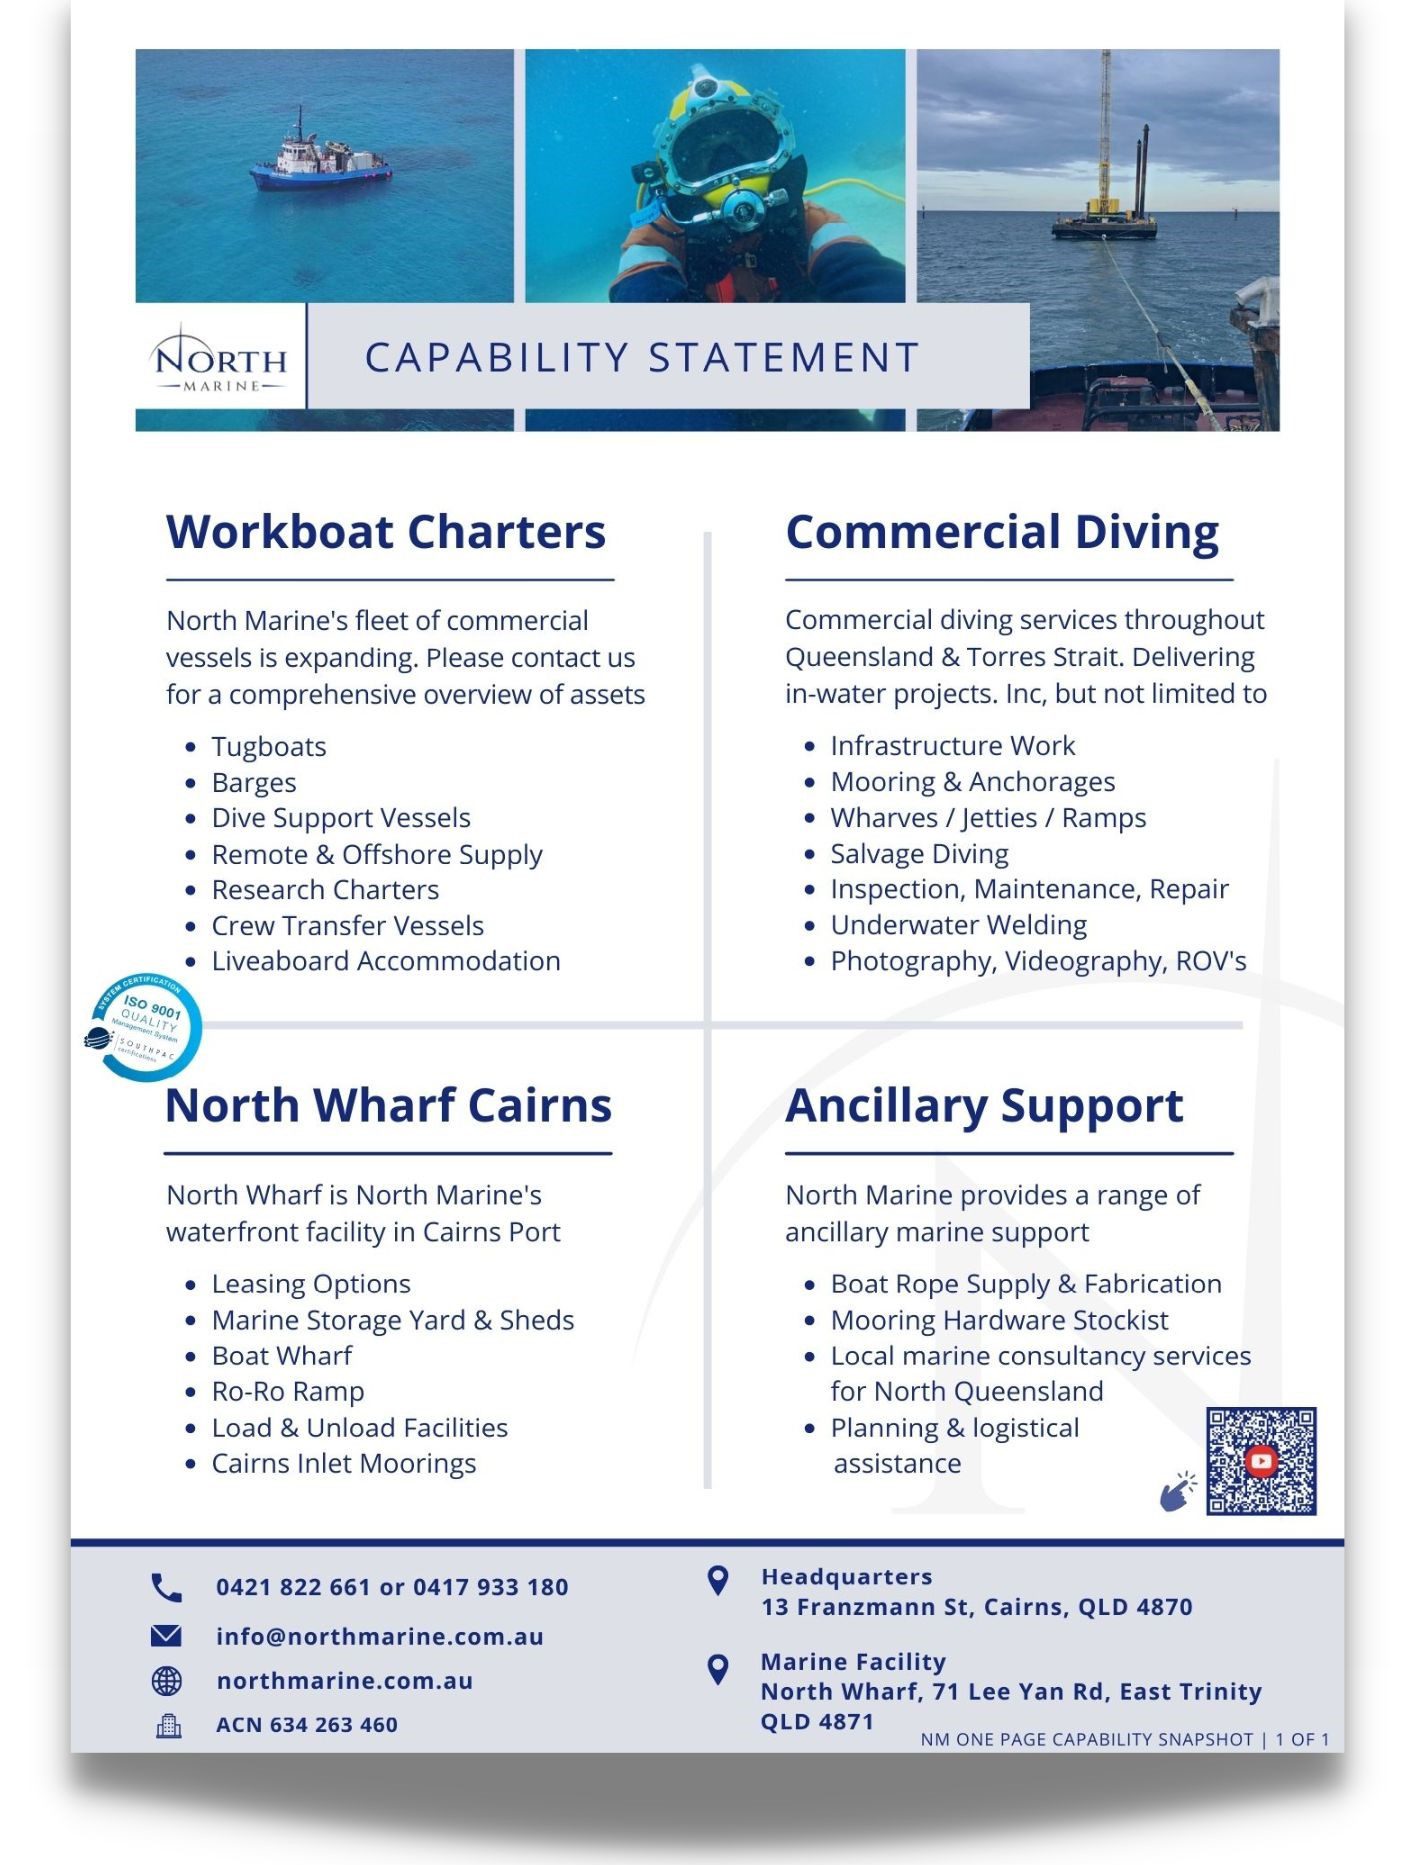 North Marine in Cairns, Company Capability One Page Snapshot